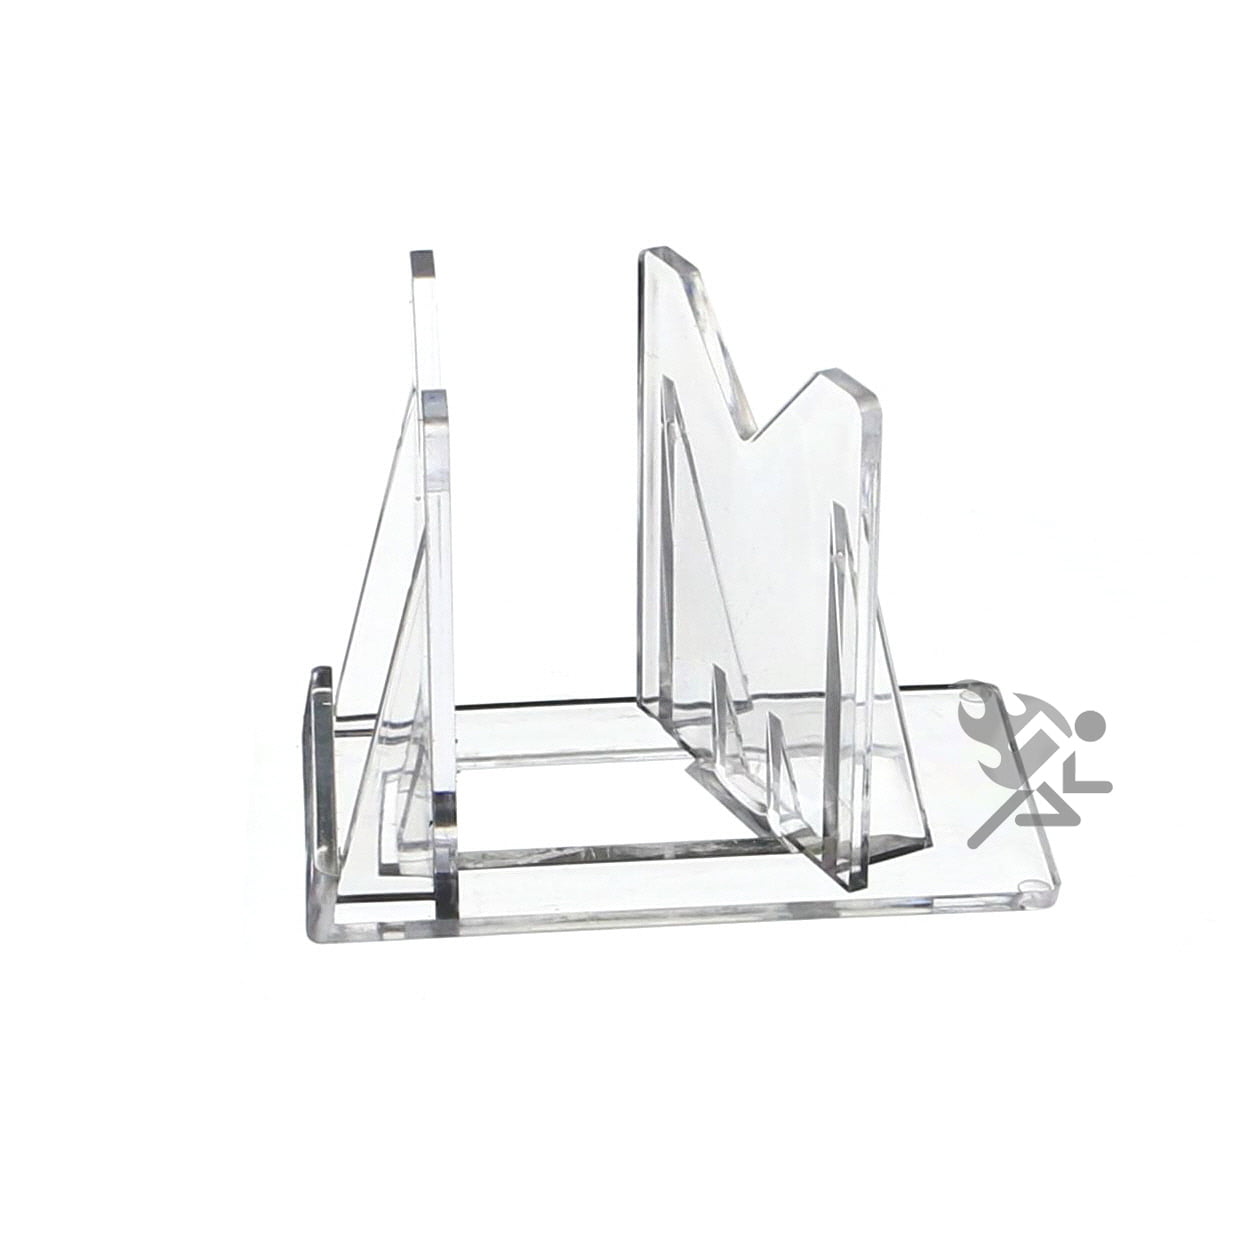 1 Packs of Fishing Lure Display Stands Adjustable Acrylic Good Easel Useful N3L9